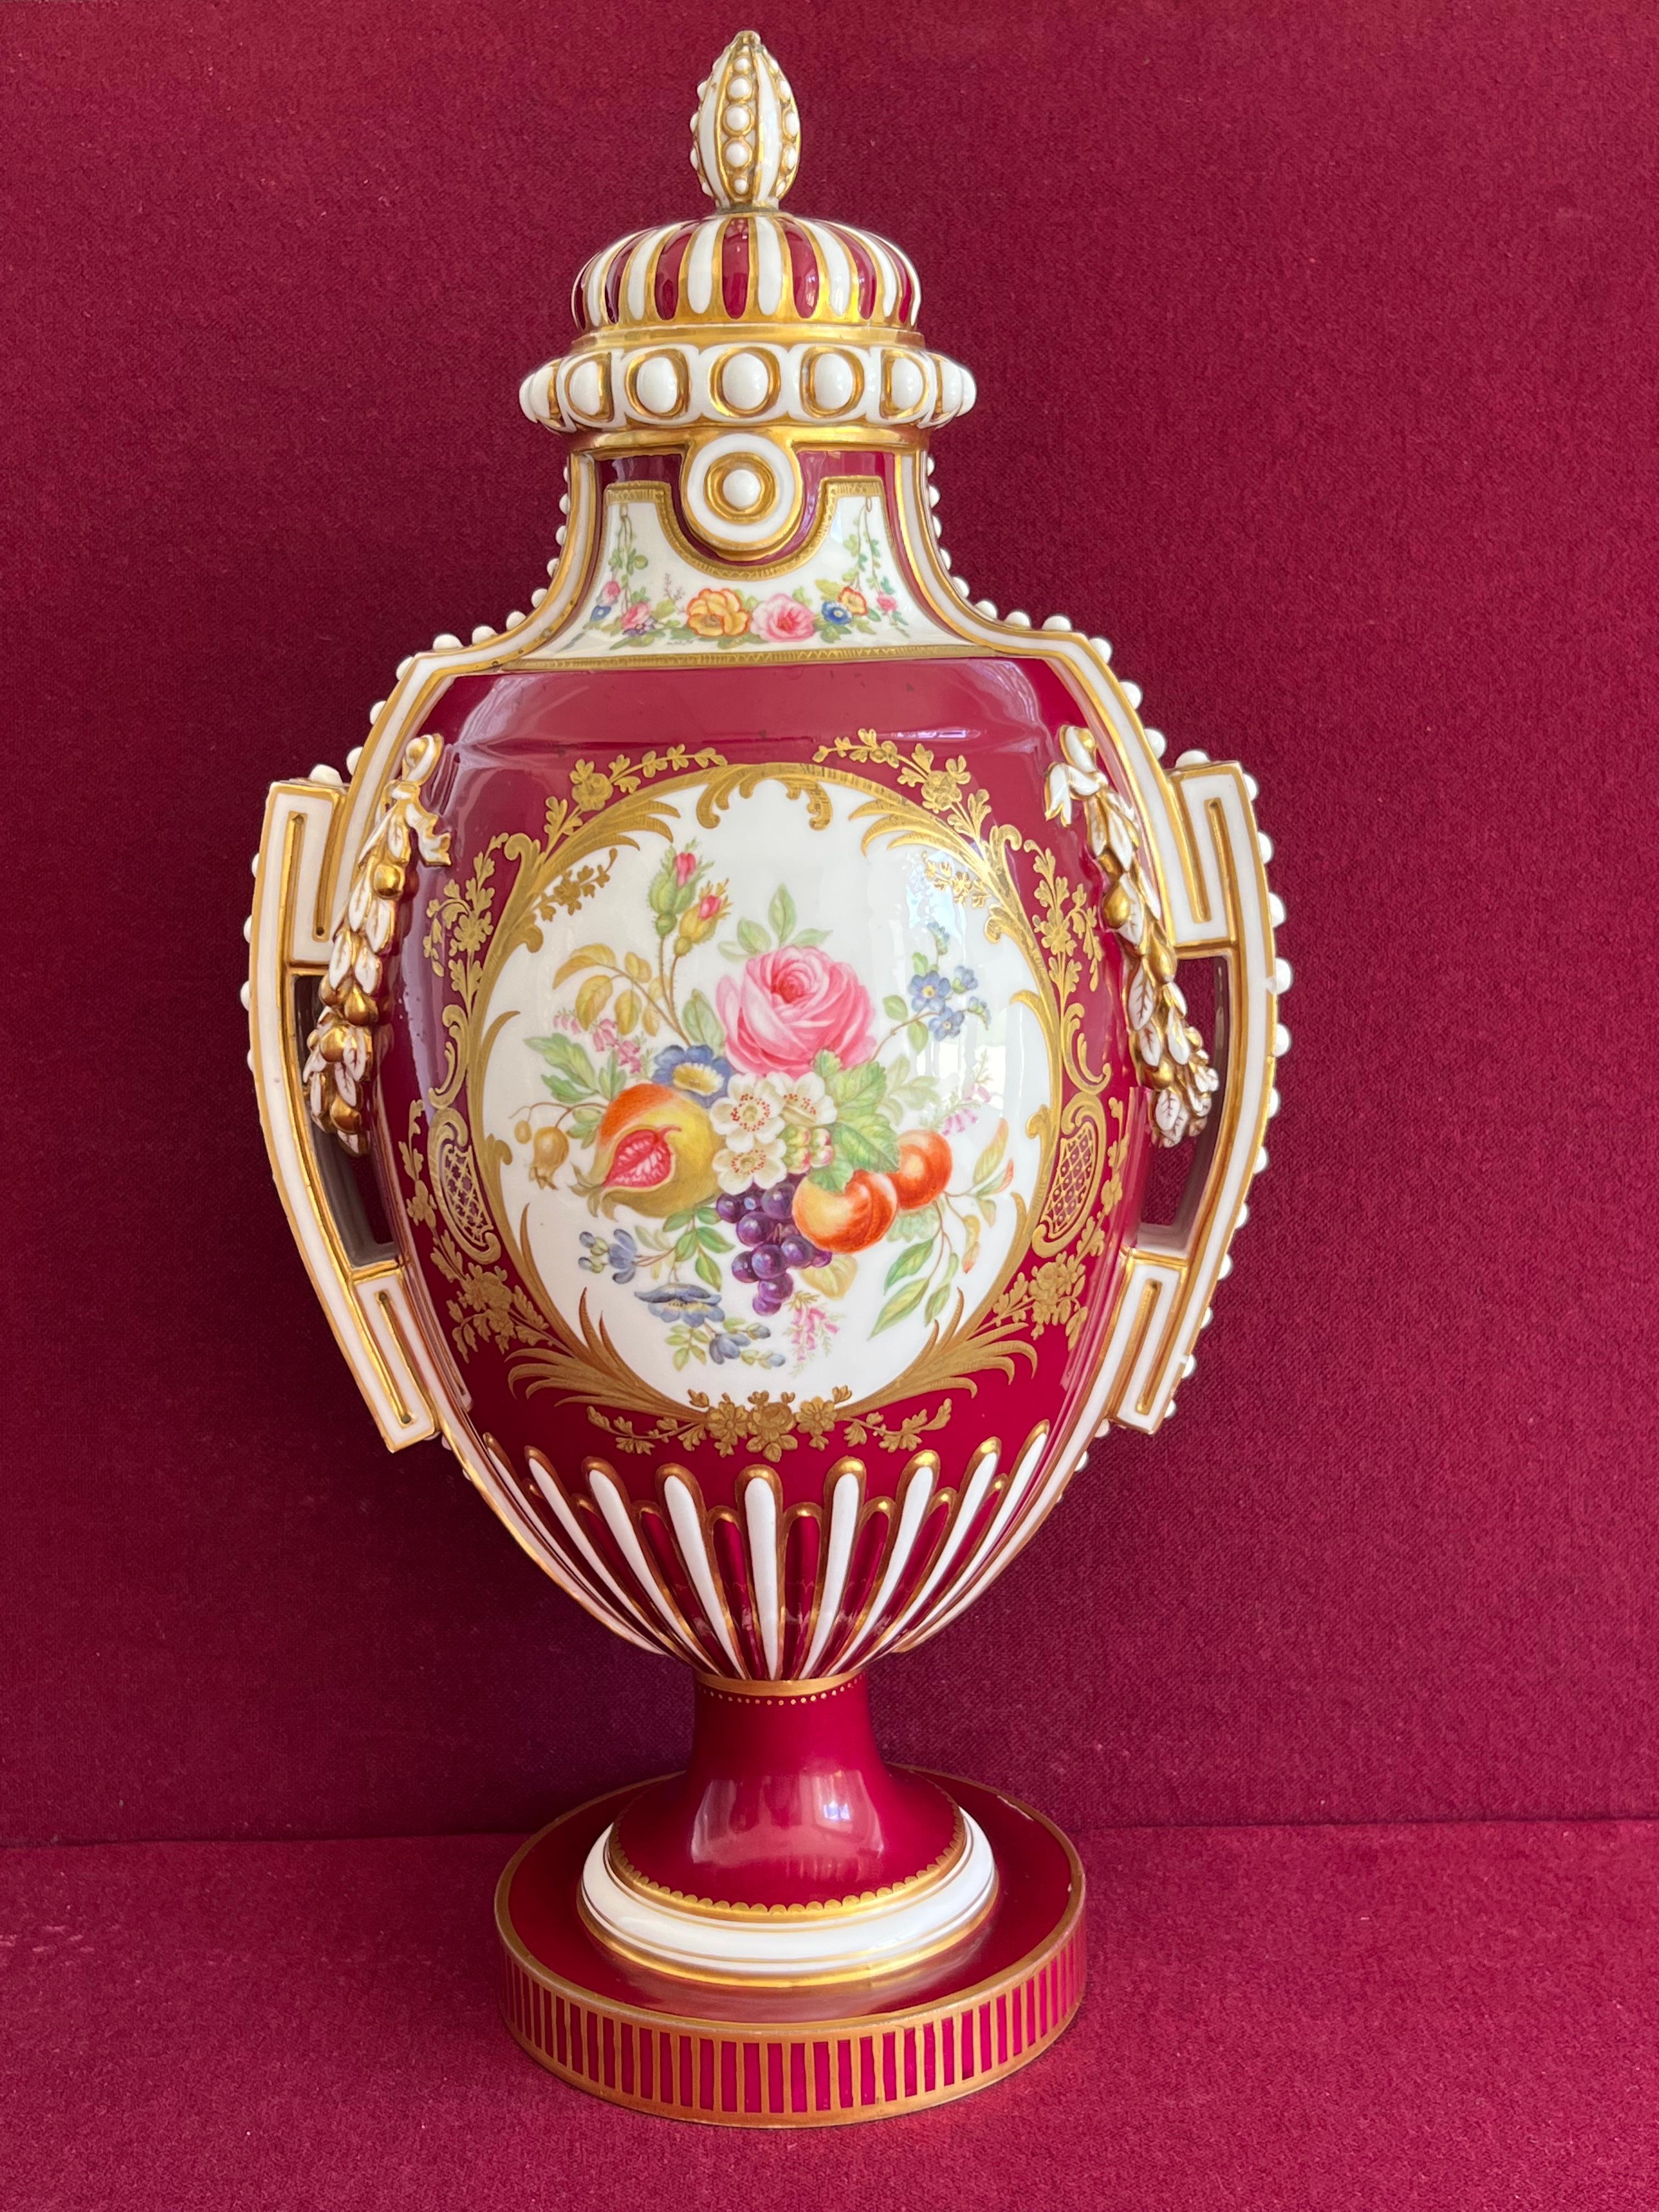 Rococo Revival Superb Pair of Coalport Porcelain Vases Decorated by William Cook For Sale